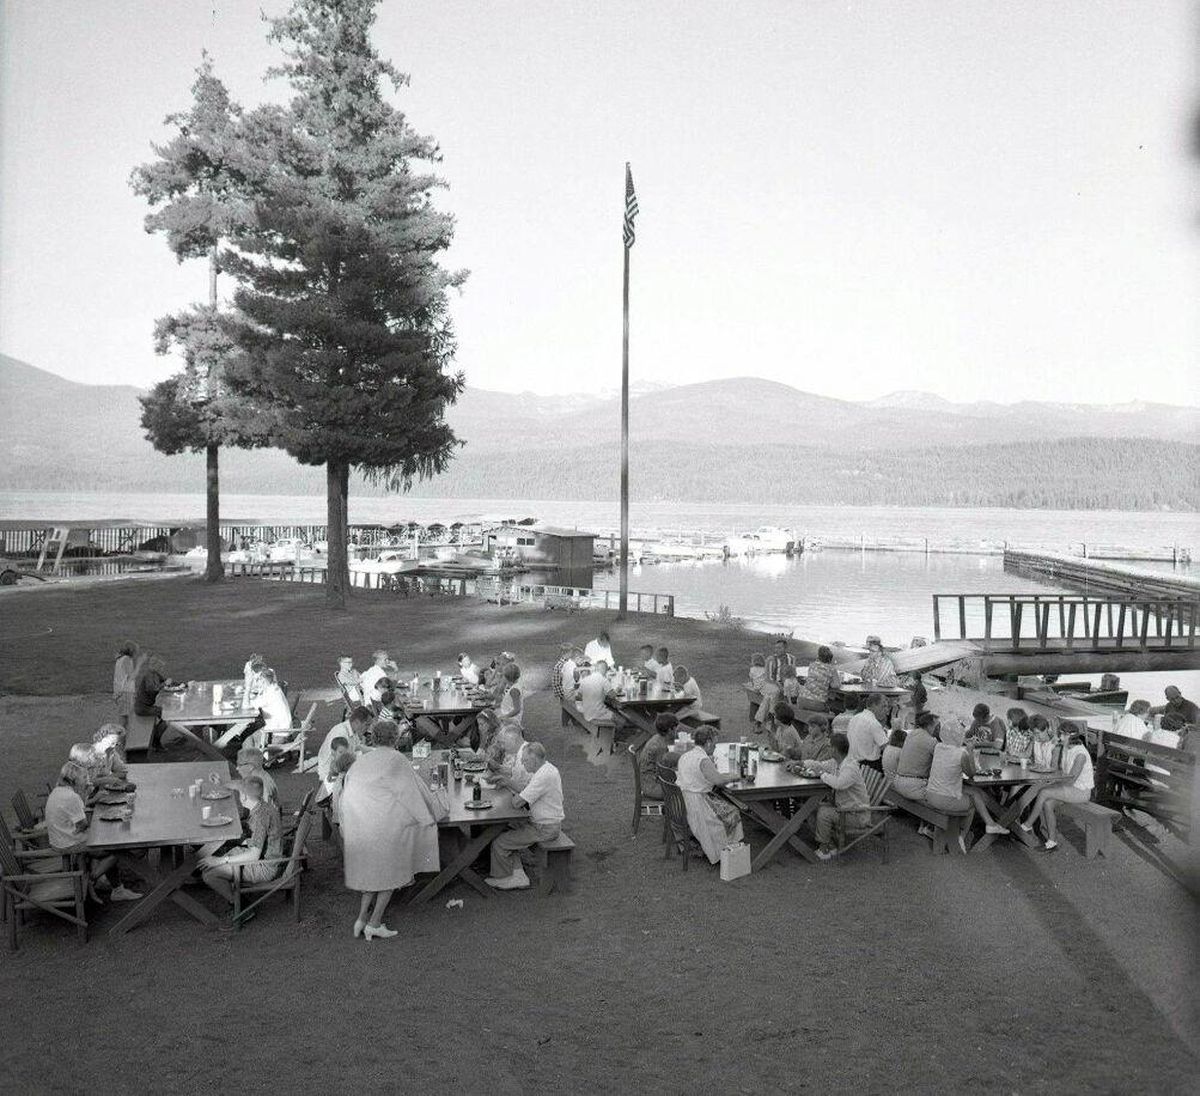 This undated historical image, provided by Elkins Resort current owner Tracie Szybnski, shows visitors dining on the lawn at the resort.  (Photo courtesy of Tracie Szybnsk)